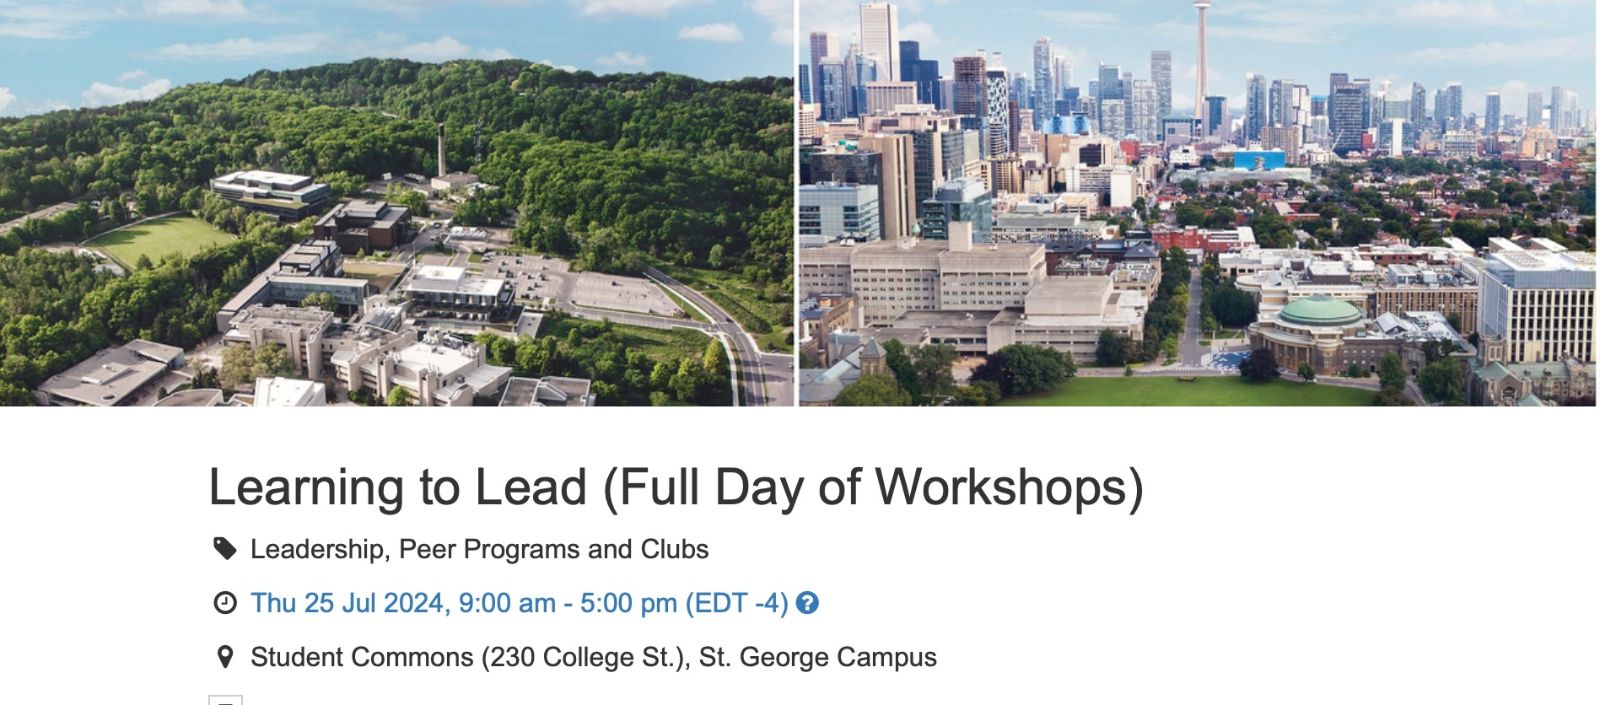 Event poster for 'Learning to Lead (Full Day of Workshops)' at Student Commons, St. George Campus. The poster includes a panoramic view of the University of Toronto campus with greenery and cityscape, and mentions the event date as Thursday, July 25, 2024, from 9:00 am to 5:00 pm (EDT -4).